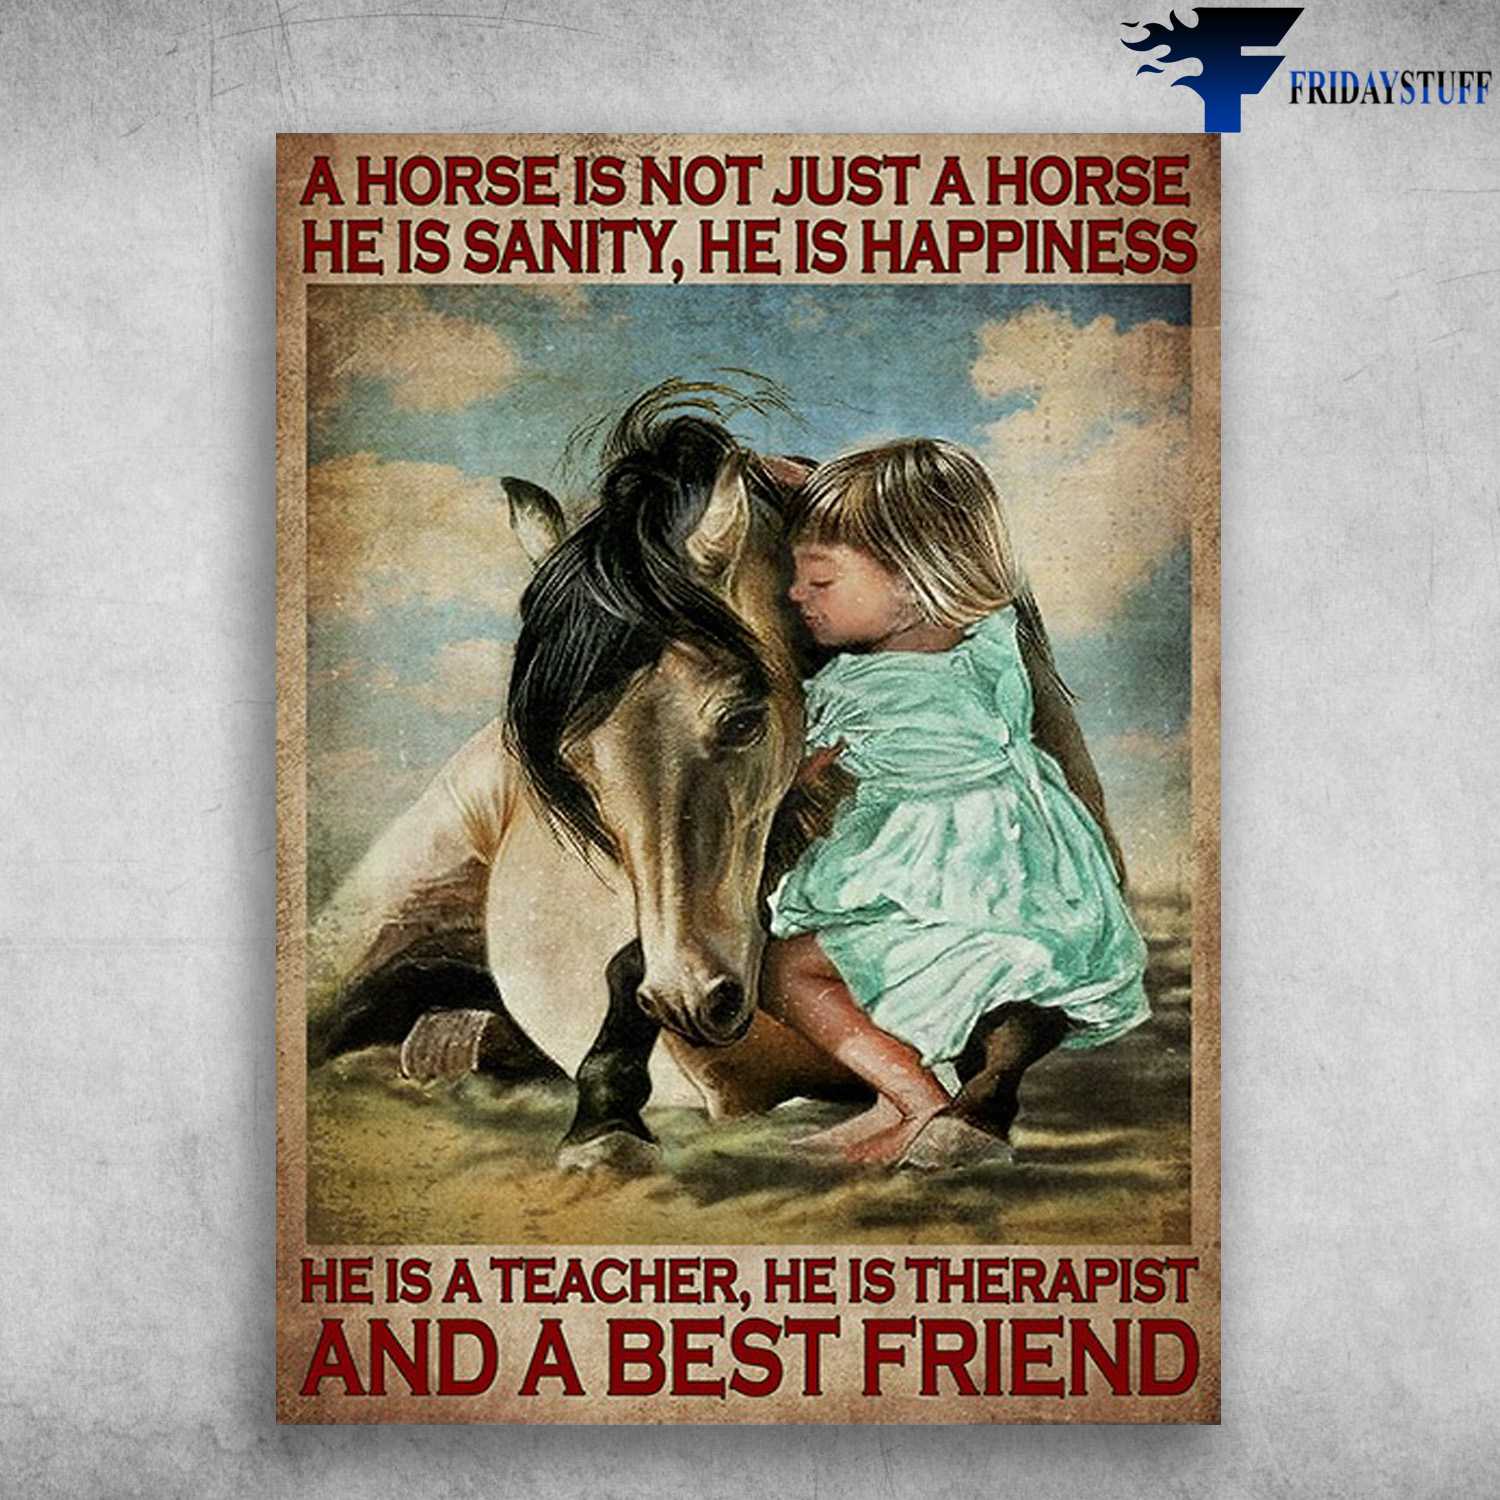 Horse Lover - A Horse Is Not Just A Horse, He Is Sanity, He Is Happiness, He Is A Teacher, He Is Therapist, And A Best Friend